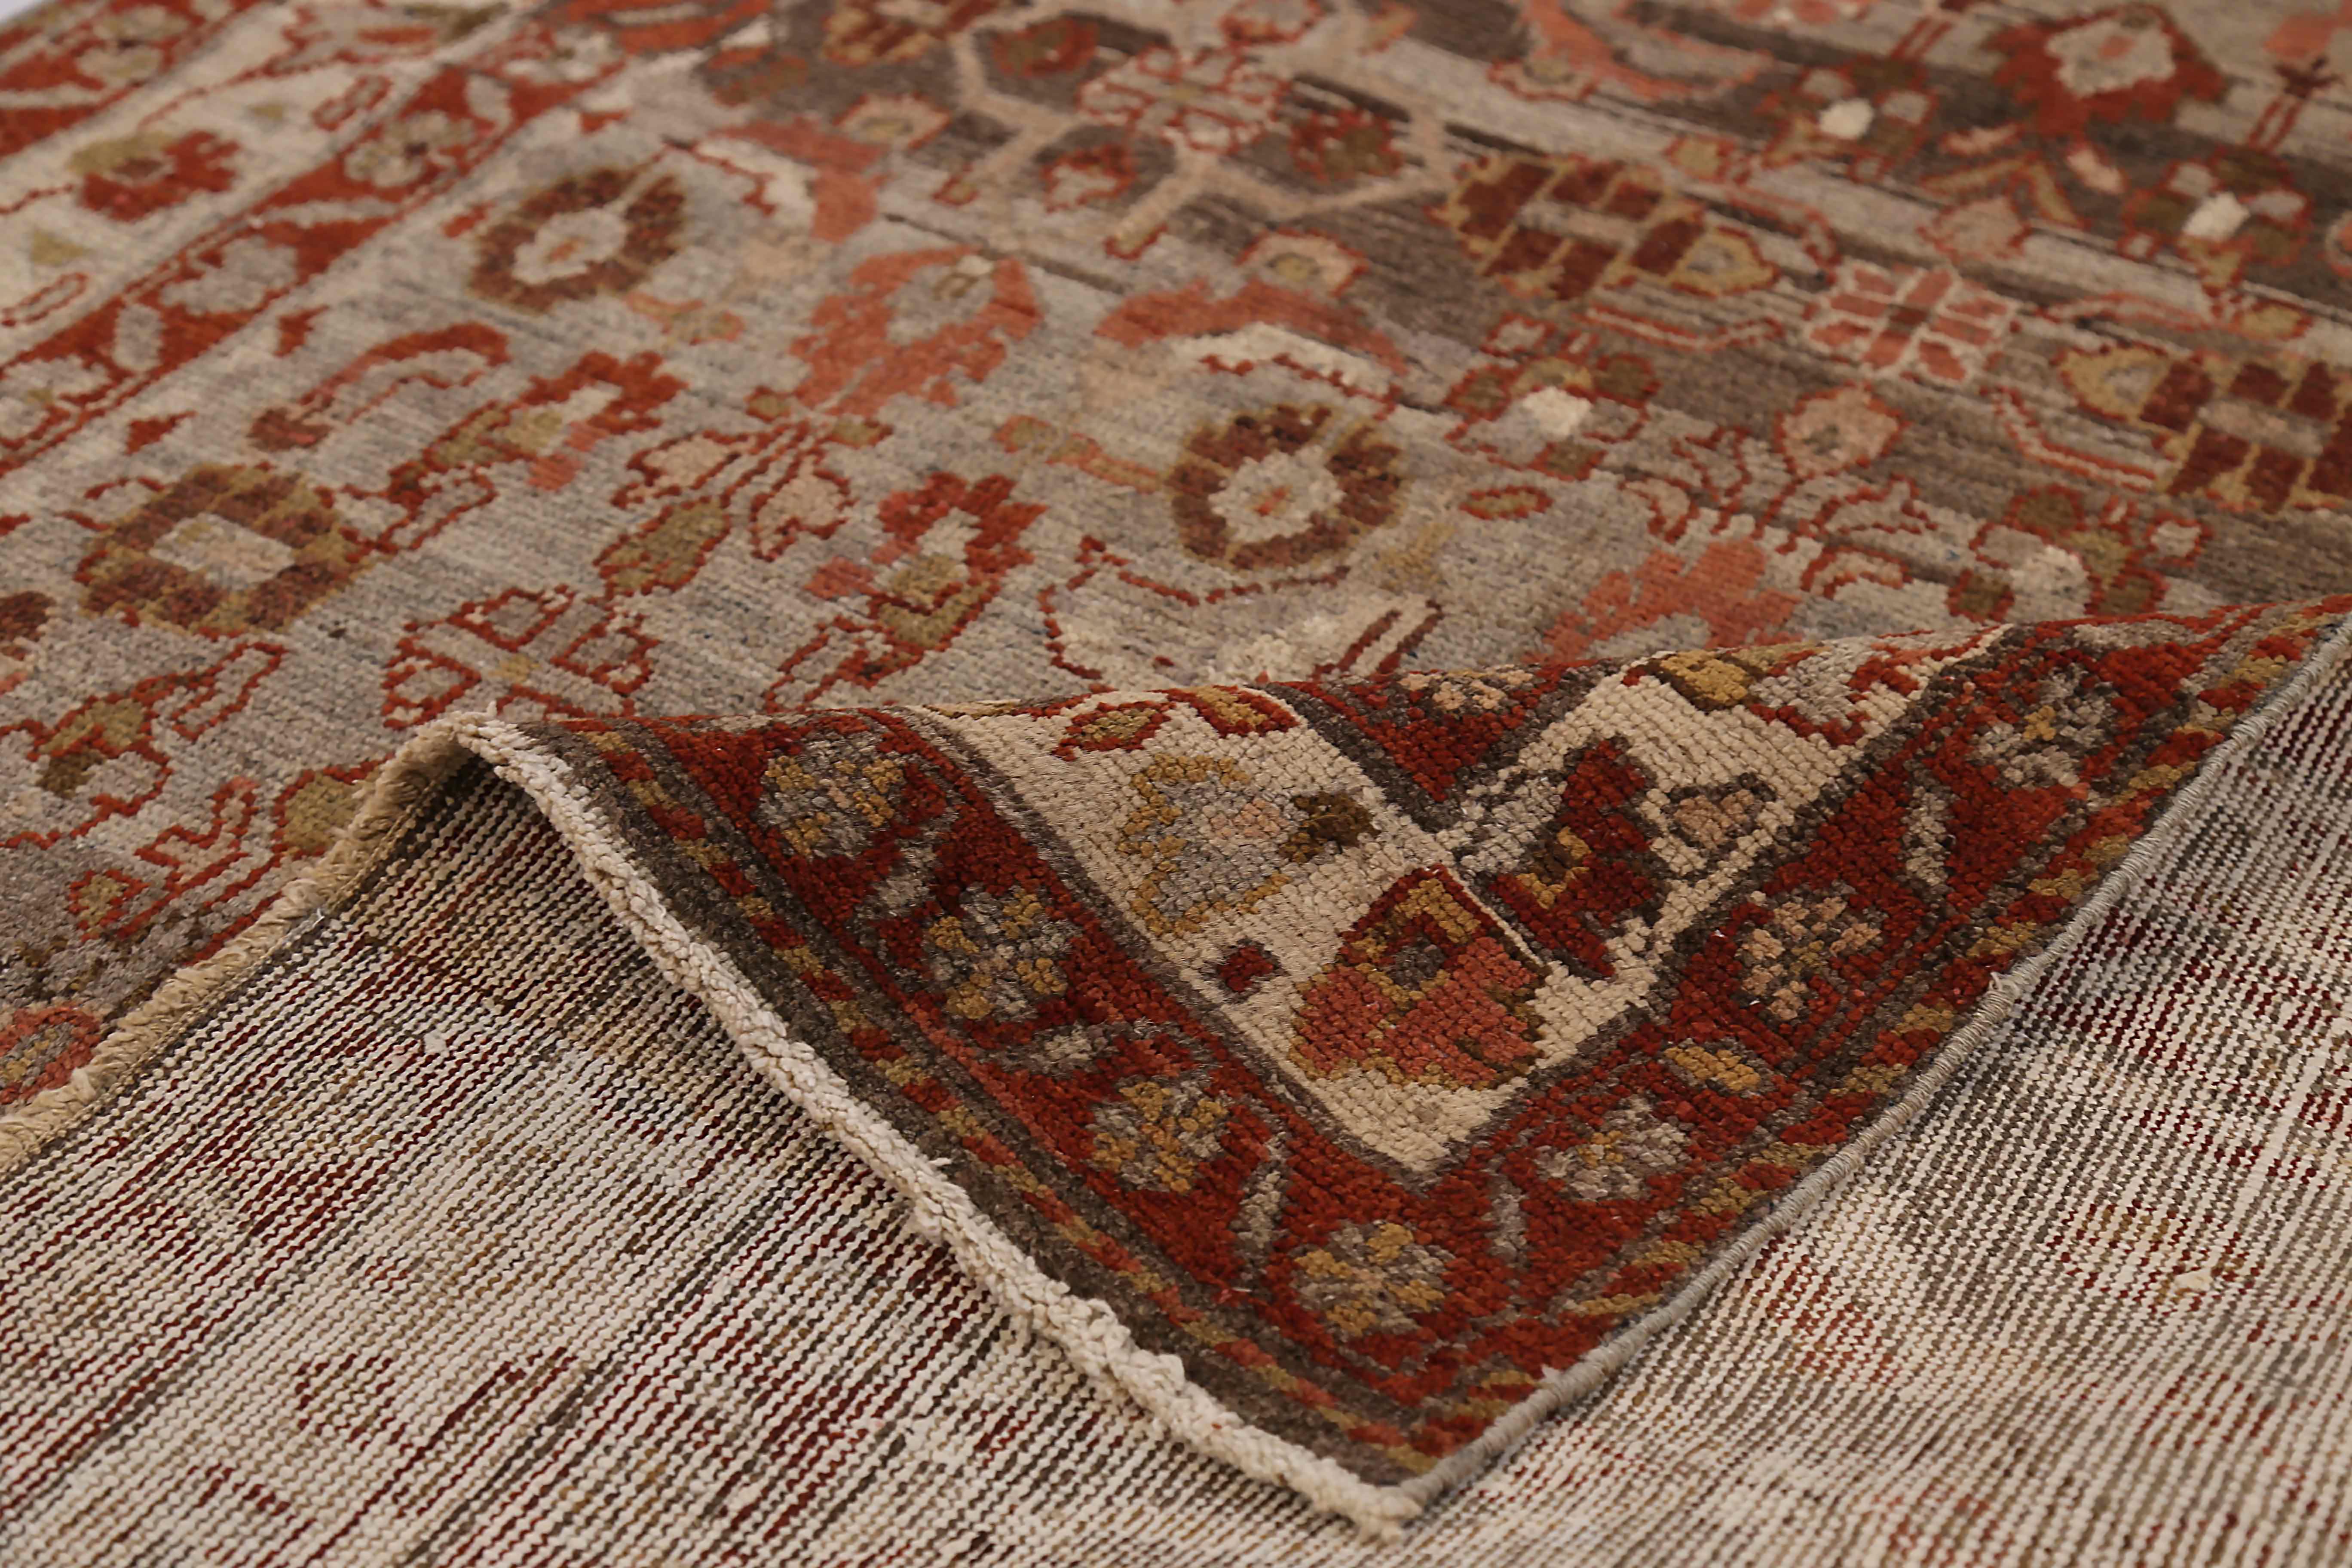 Hand-Woven Antique Persian Area Rug Saveh Design For Sale